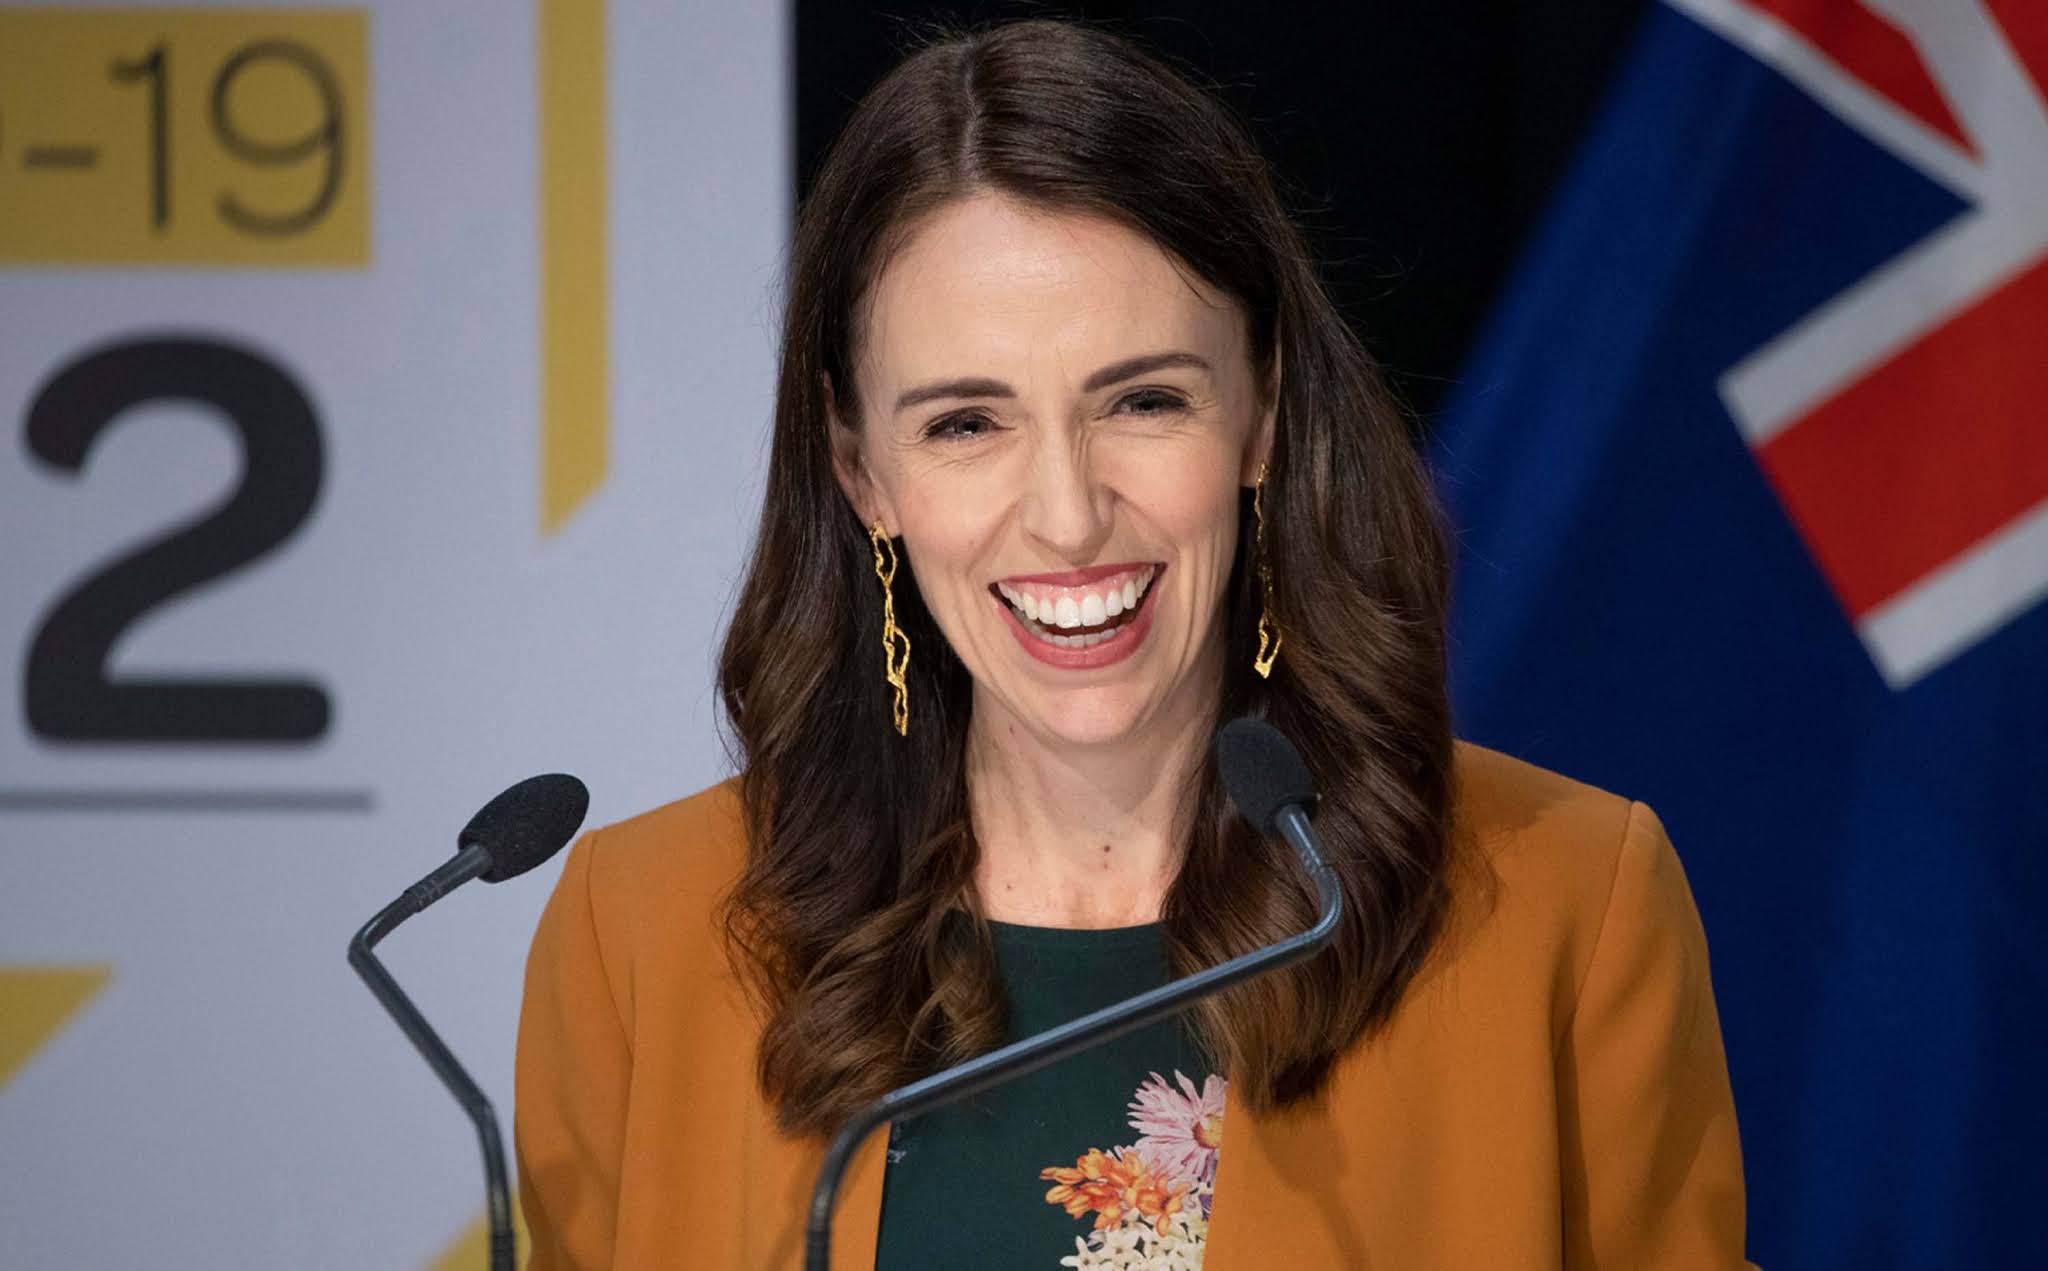 Jacinda Ardern reappointed as New Zealand’s prime minister